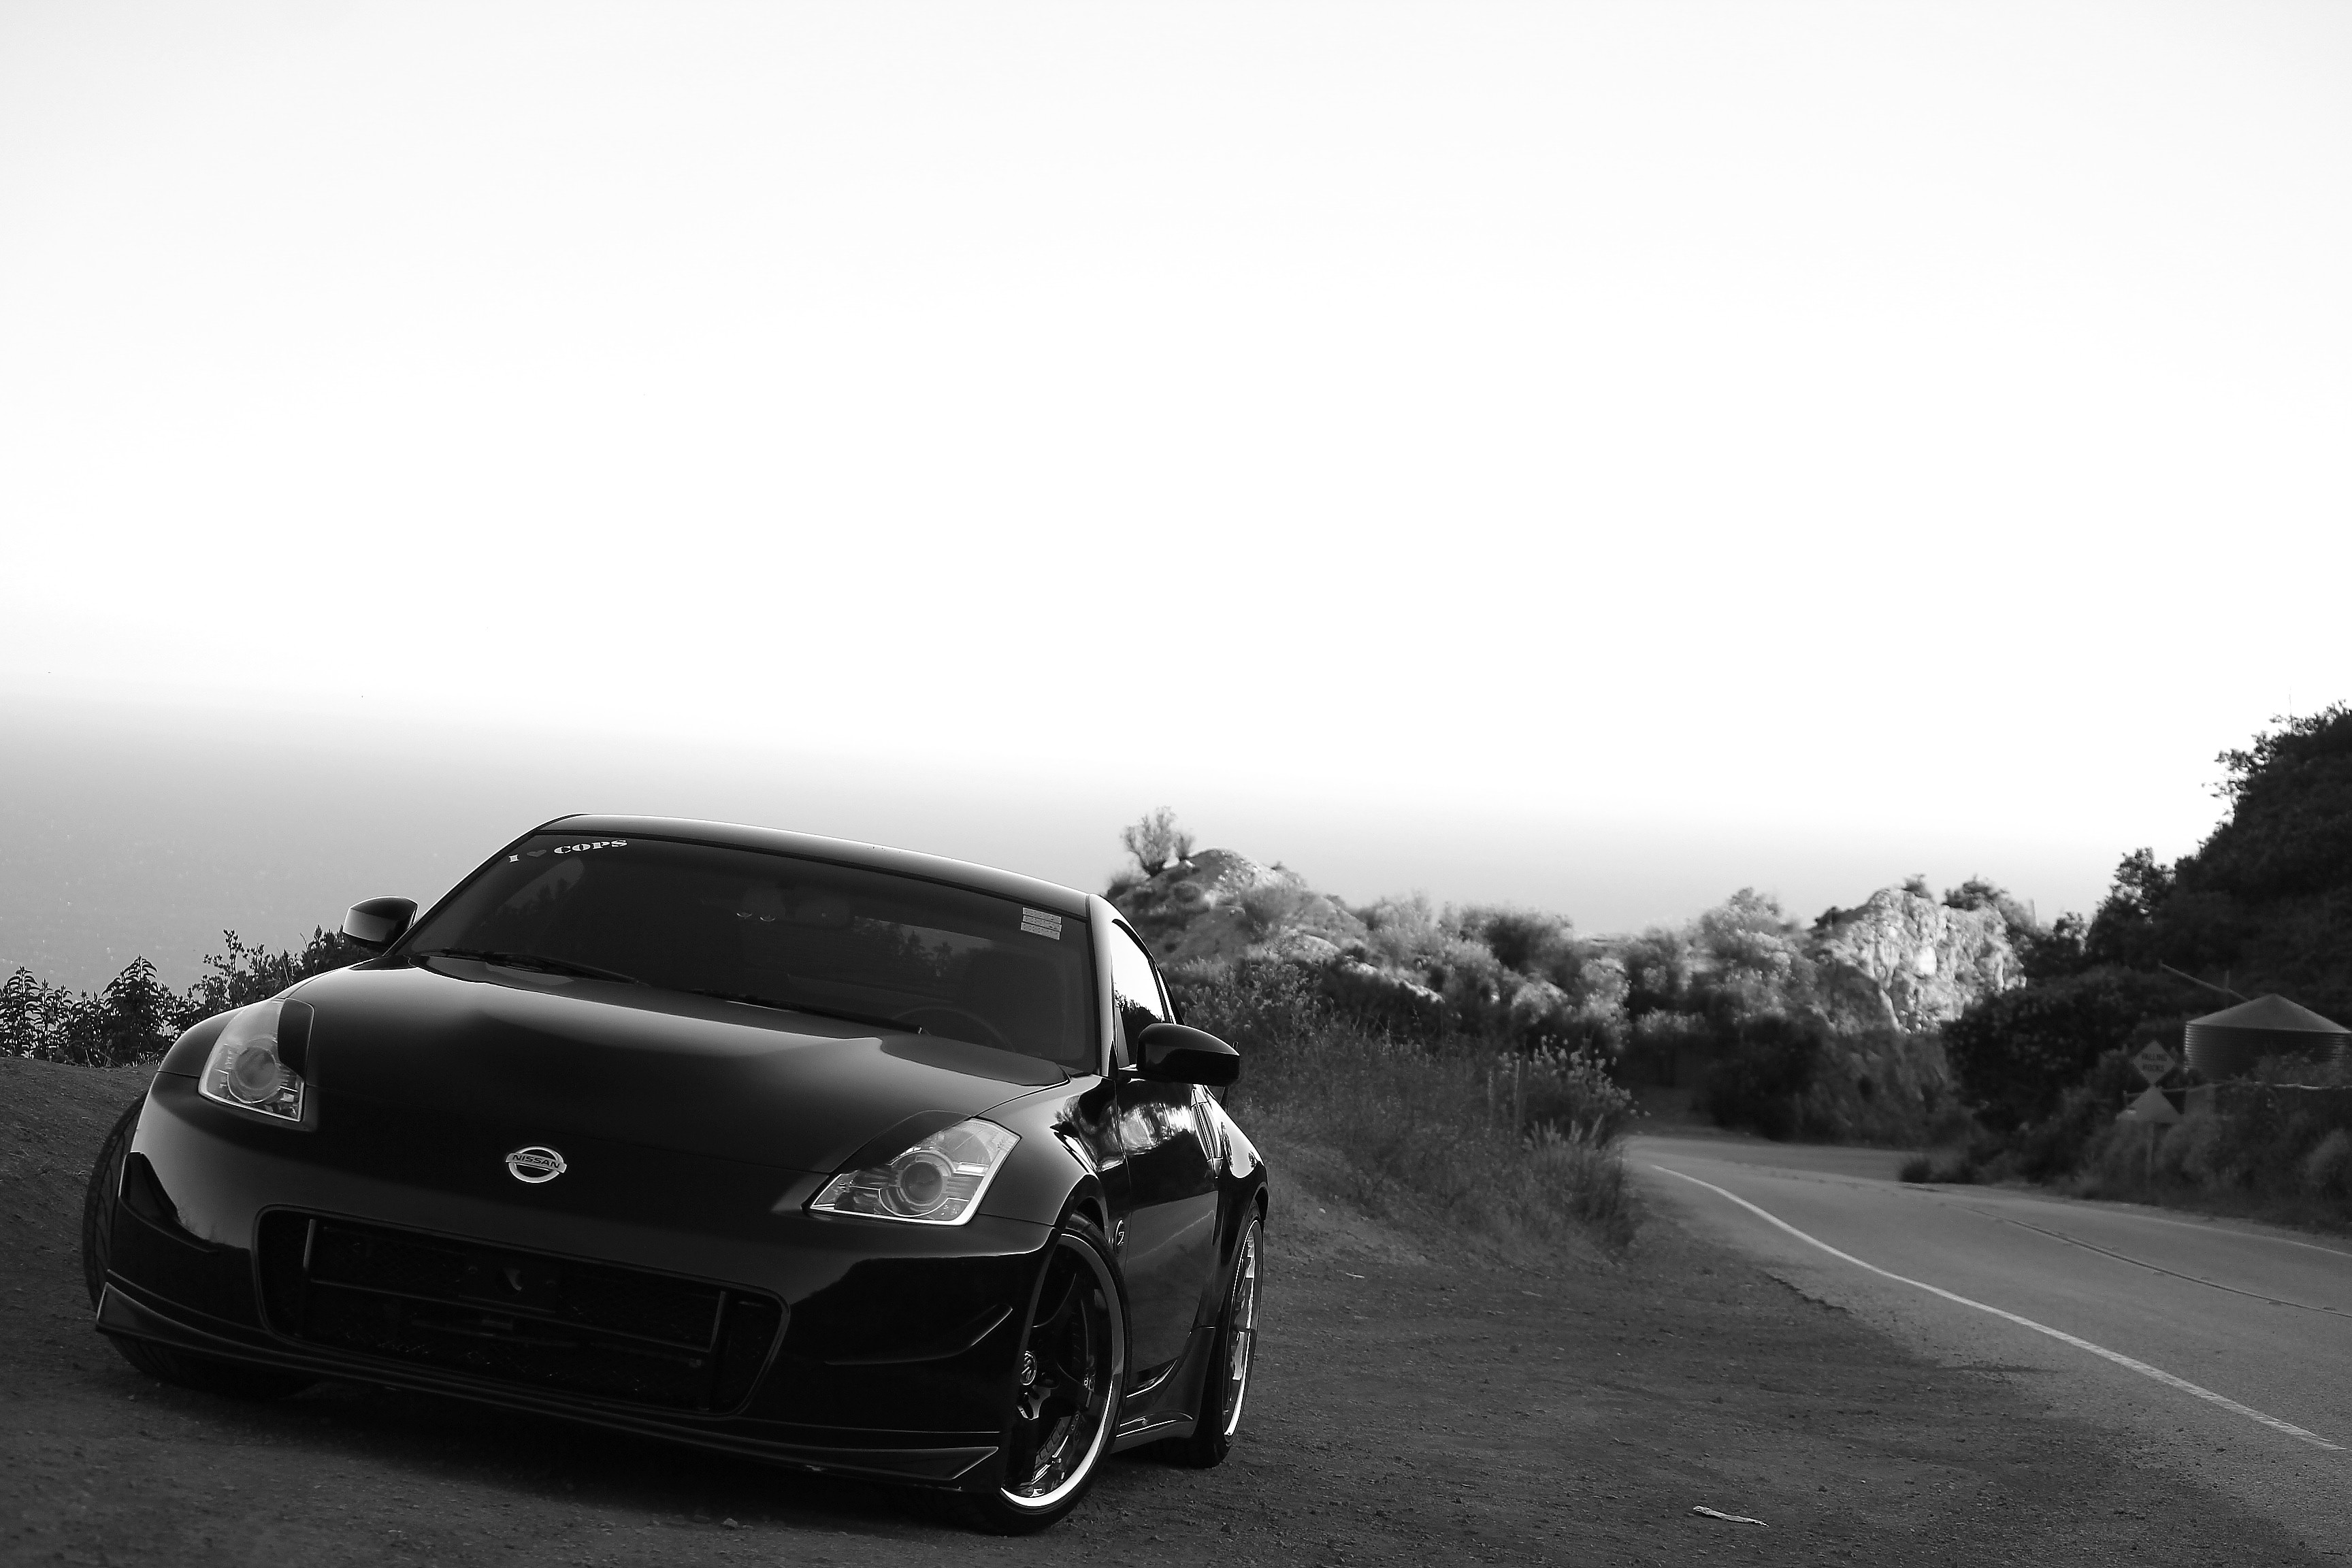 Vehicles Nissan HD Wallpaper | Background Image